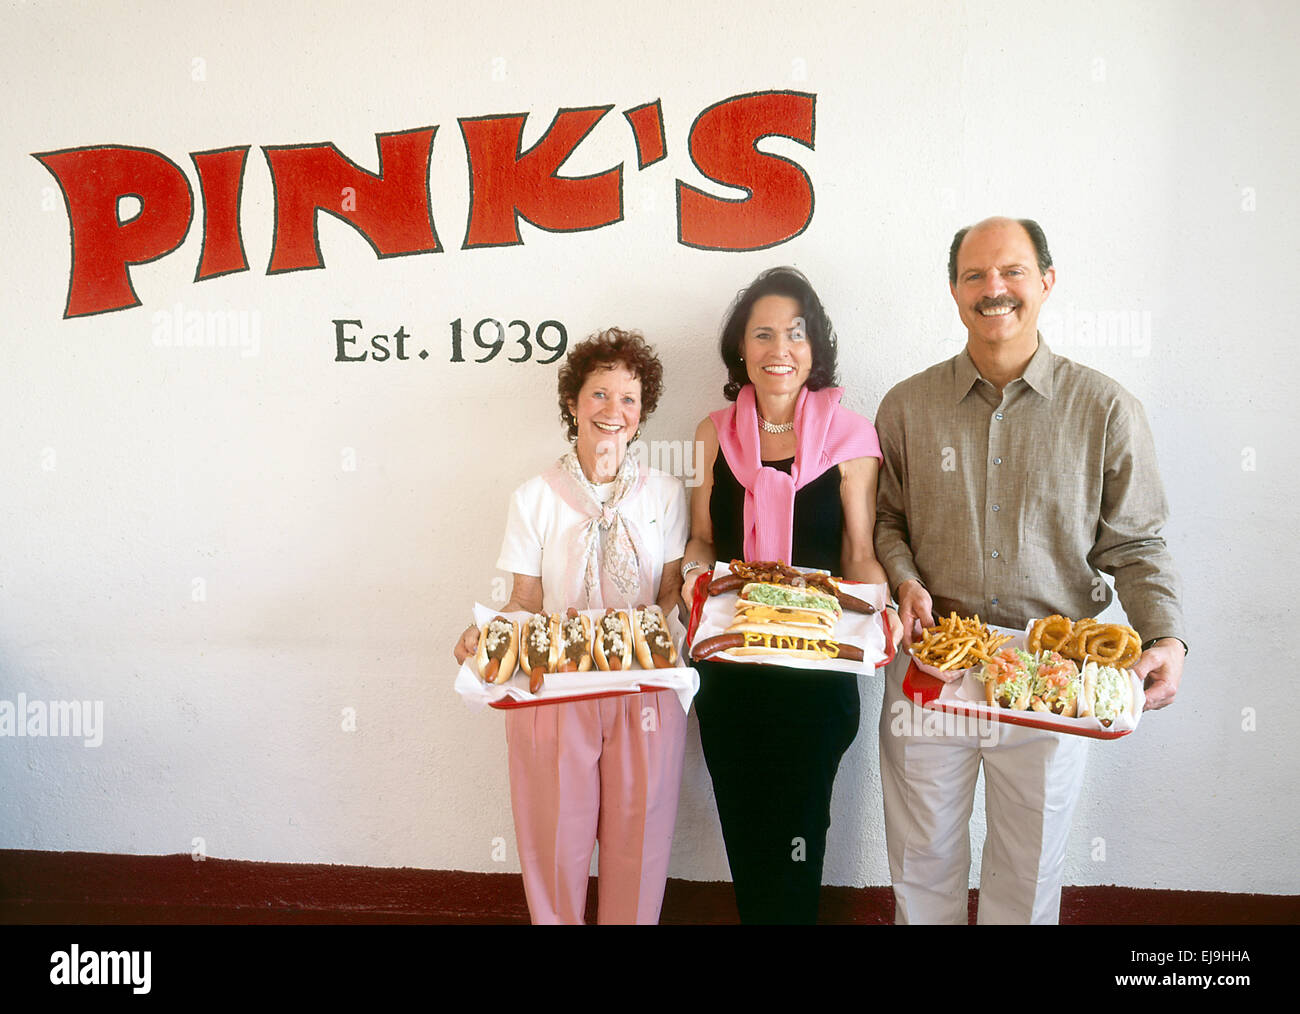 LOS ANGELES, CA – JULY 24: Pink’s Hot Dogs celebrating its 65th year in Hollywood in Los Angeles, California on July 24, 1999. Stock Photo